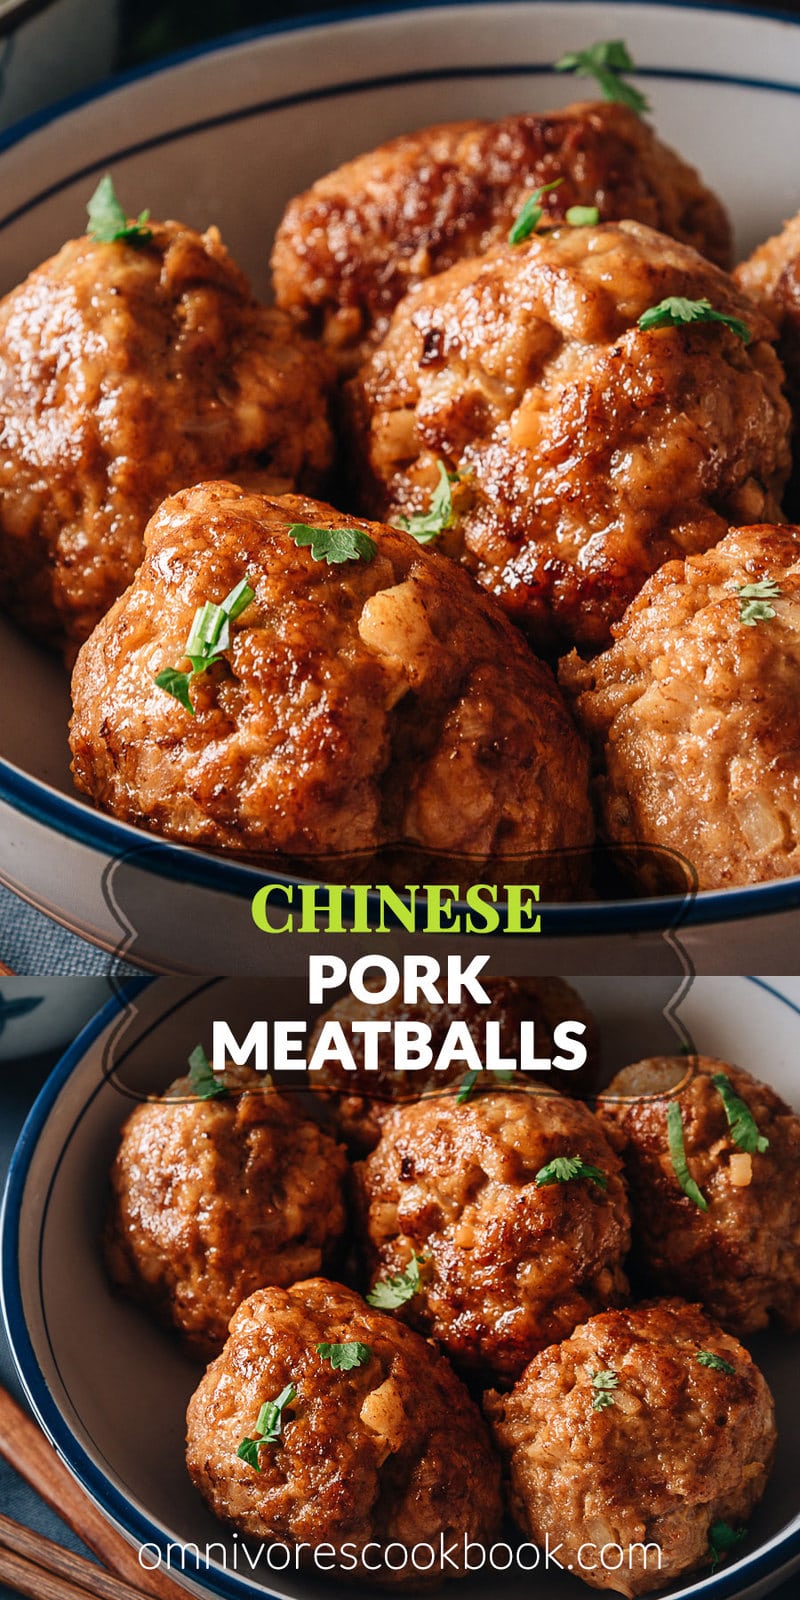 Chinese Lion’s Head Pork Meatballs | A family pork meatball recipe that uses breadcrumbs, water chestnuts, and aromatics to make super light, fluffy and juicy meatballs that are bursting with flavor. 